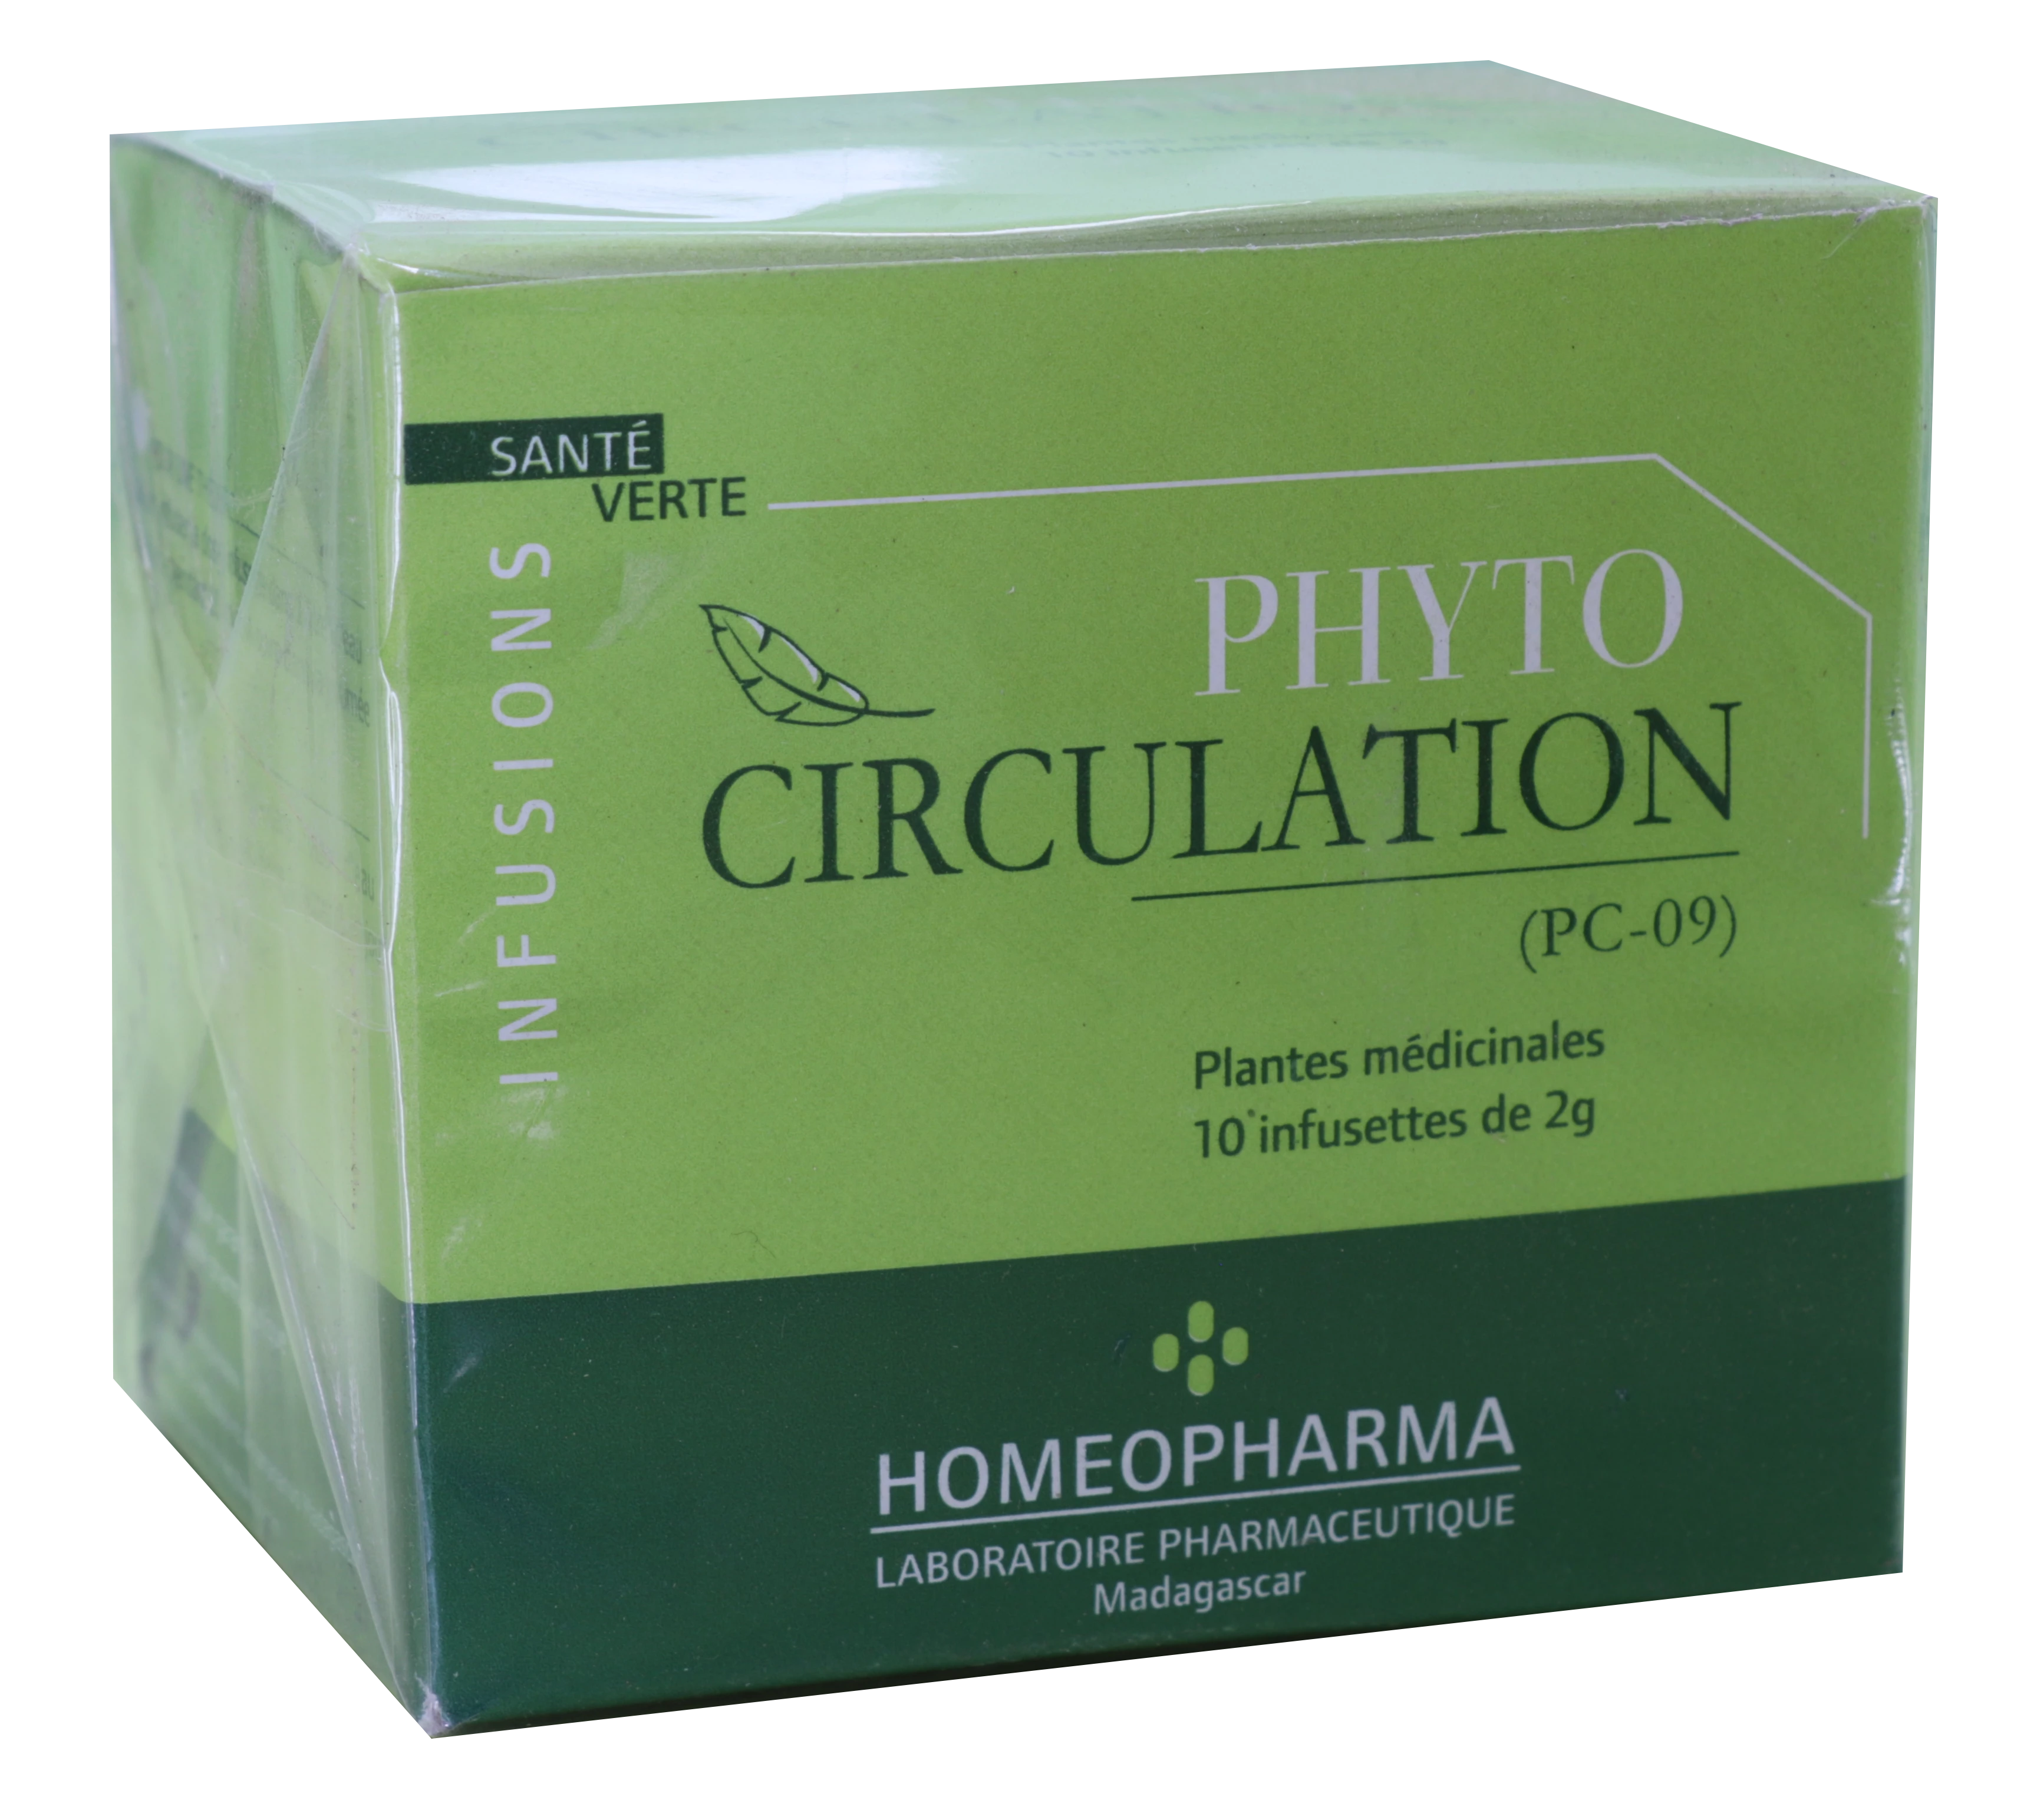 Phytotherapie Traditionnelle Pc09-phyto-circulation Bte 20 Infusettes - HOMEOPHARMA